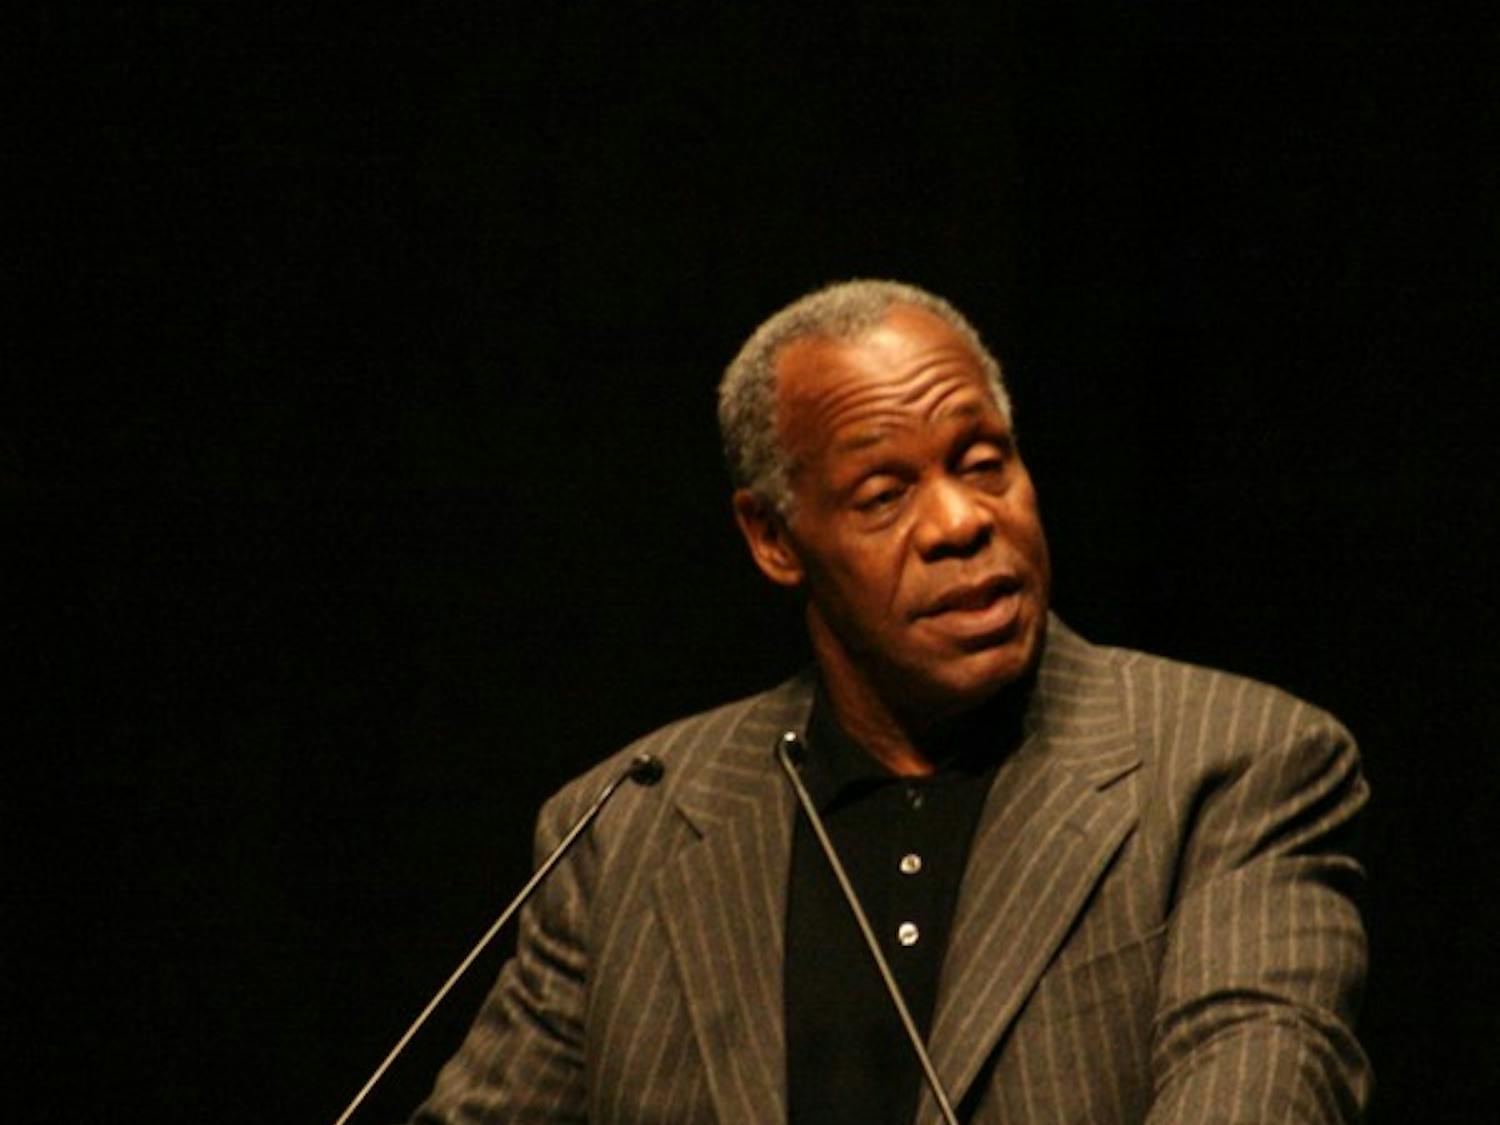 Danny Glover, famous for his role in “Angels in the Outfield,” capped Martin Luther King Jr. week at UNC. DTH/Jessica Kennedy